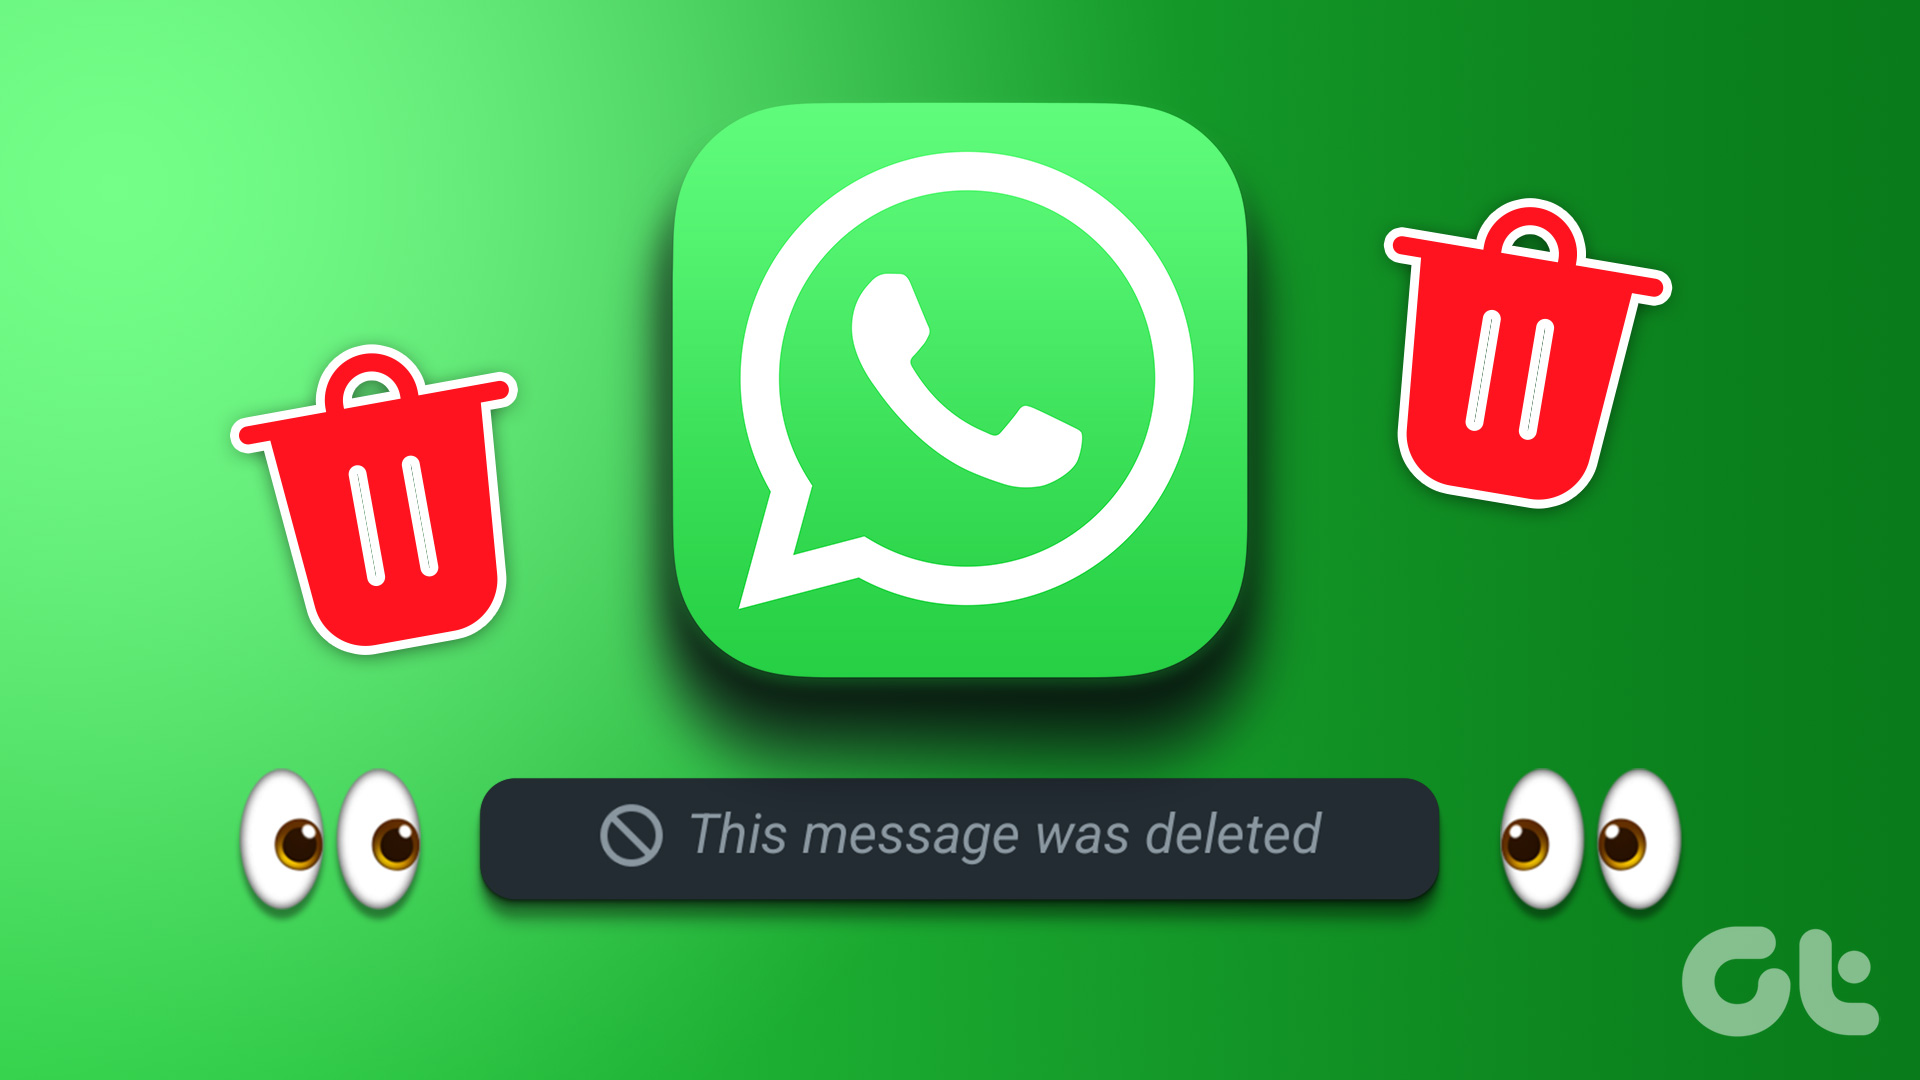 How to Delete a WhatsApp Message Without Opening It